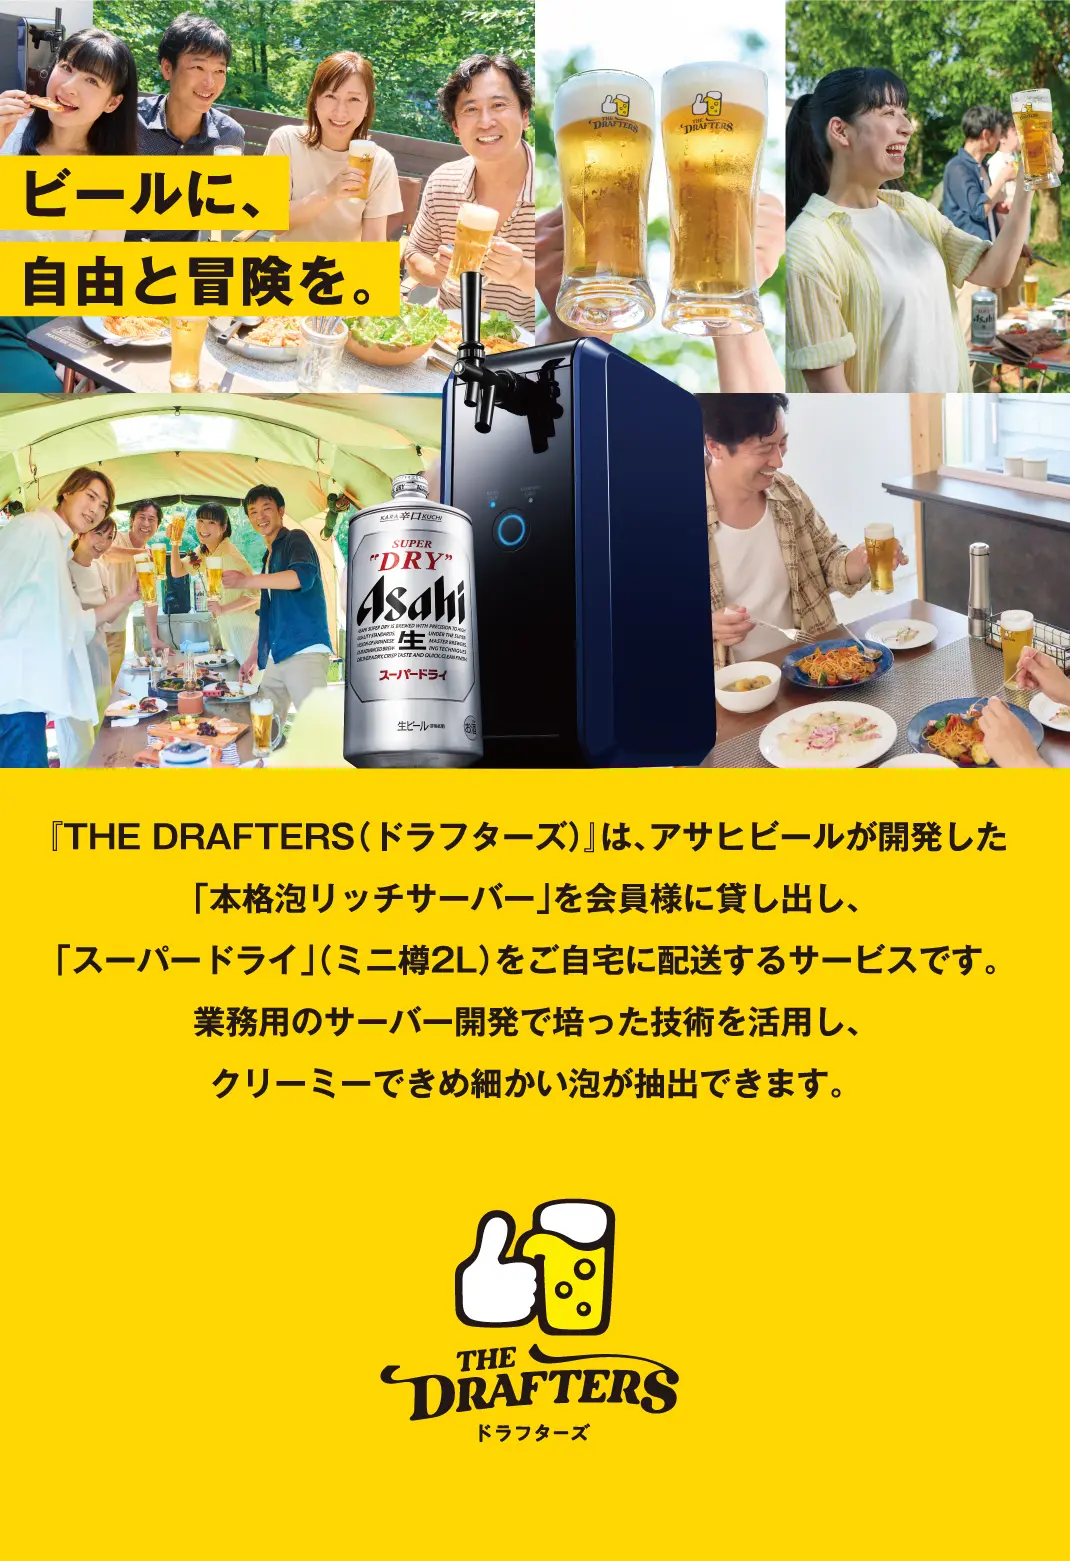 THE DRAFTERS | ビールに自由と冒険を。